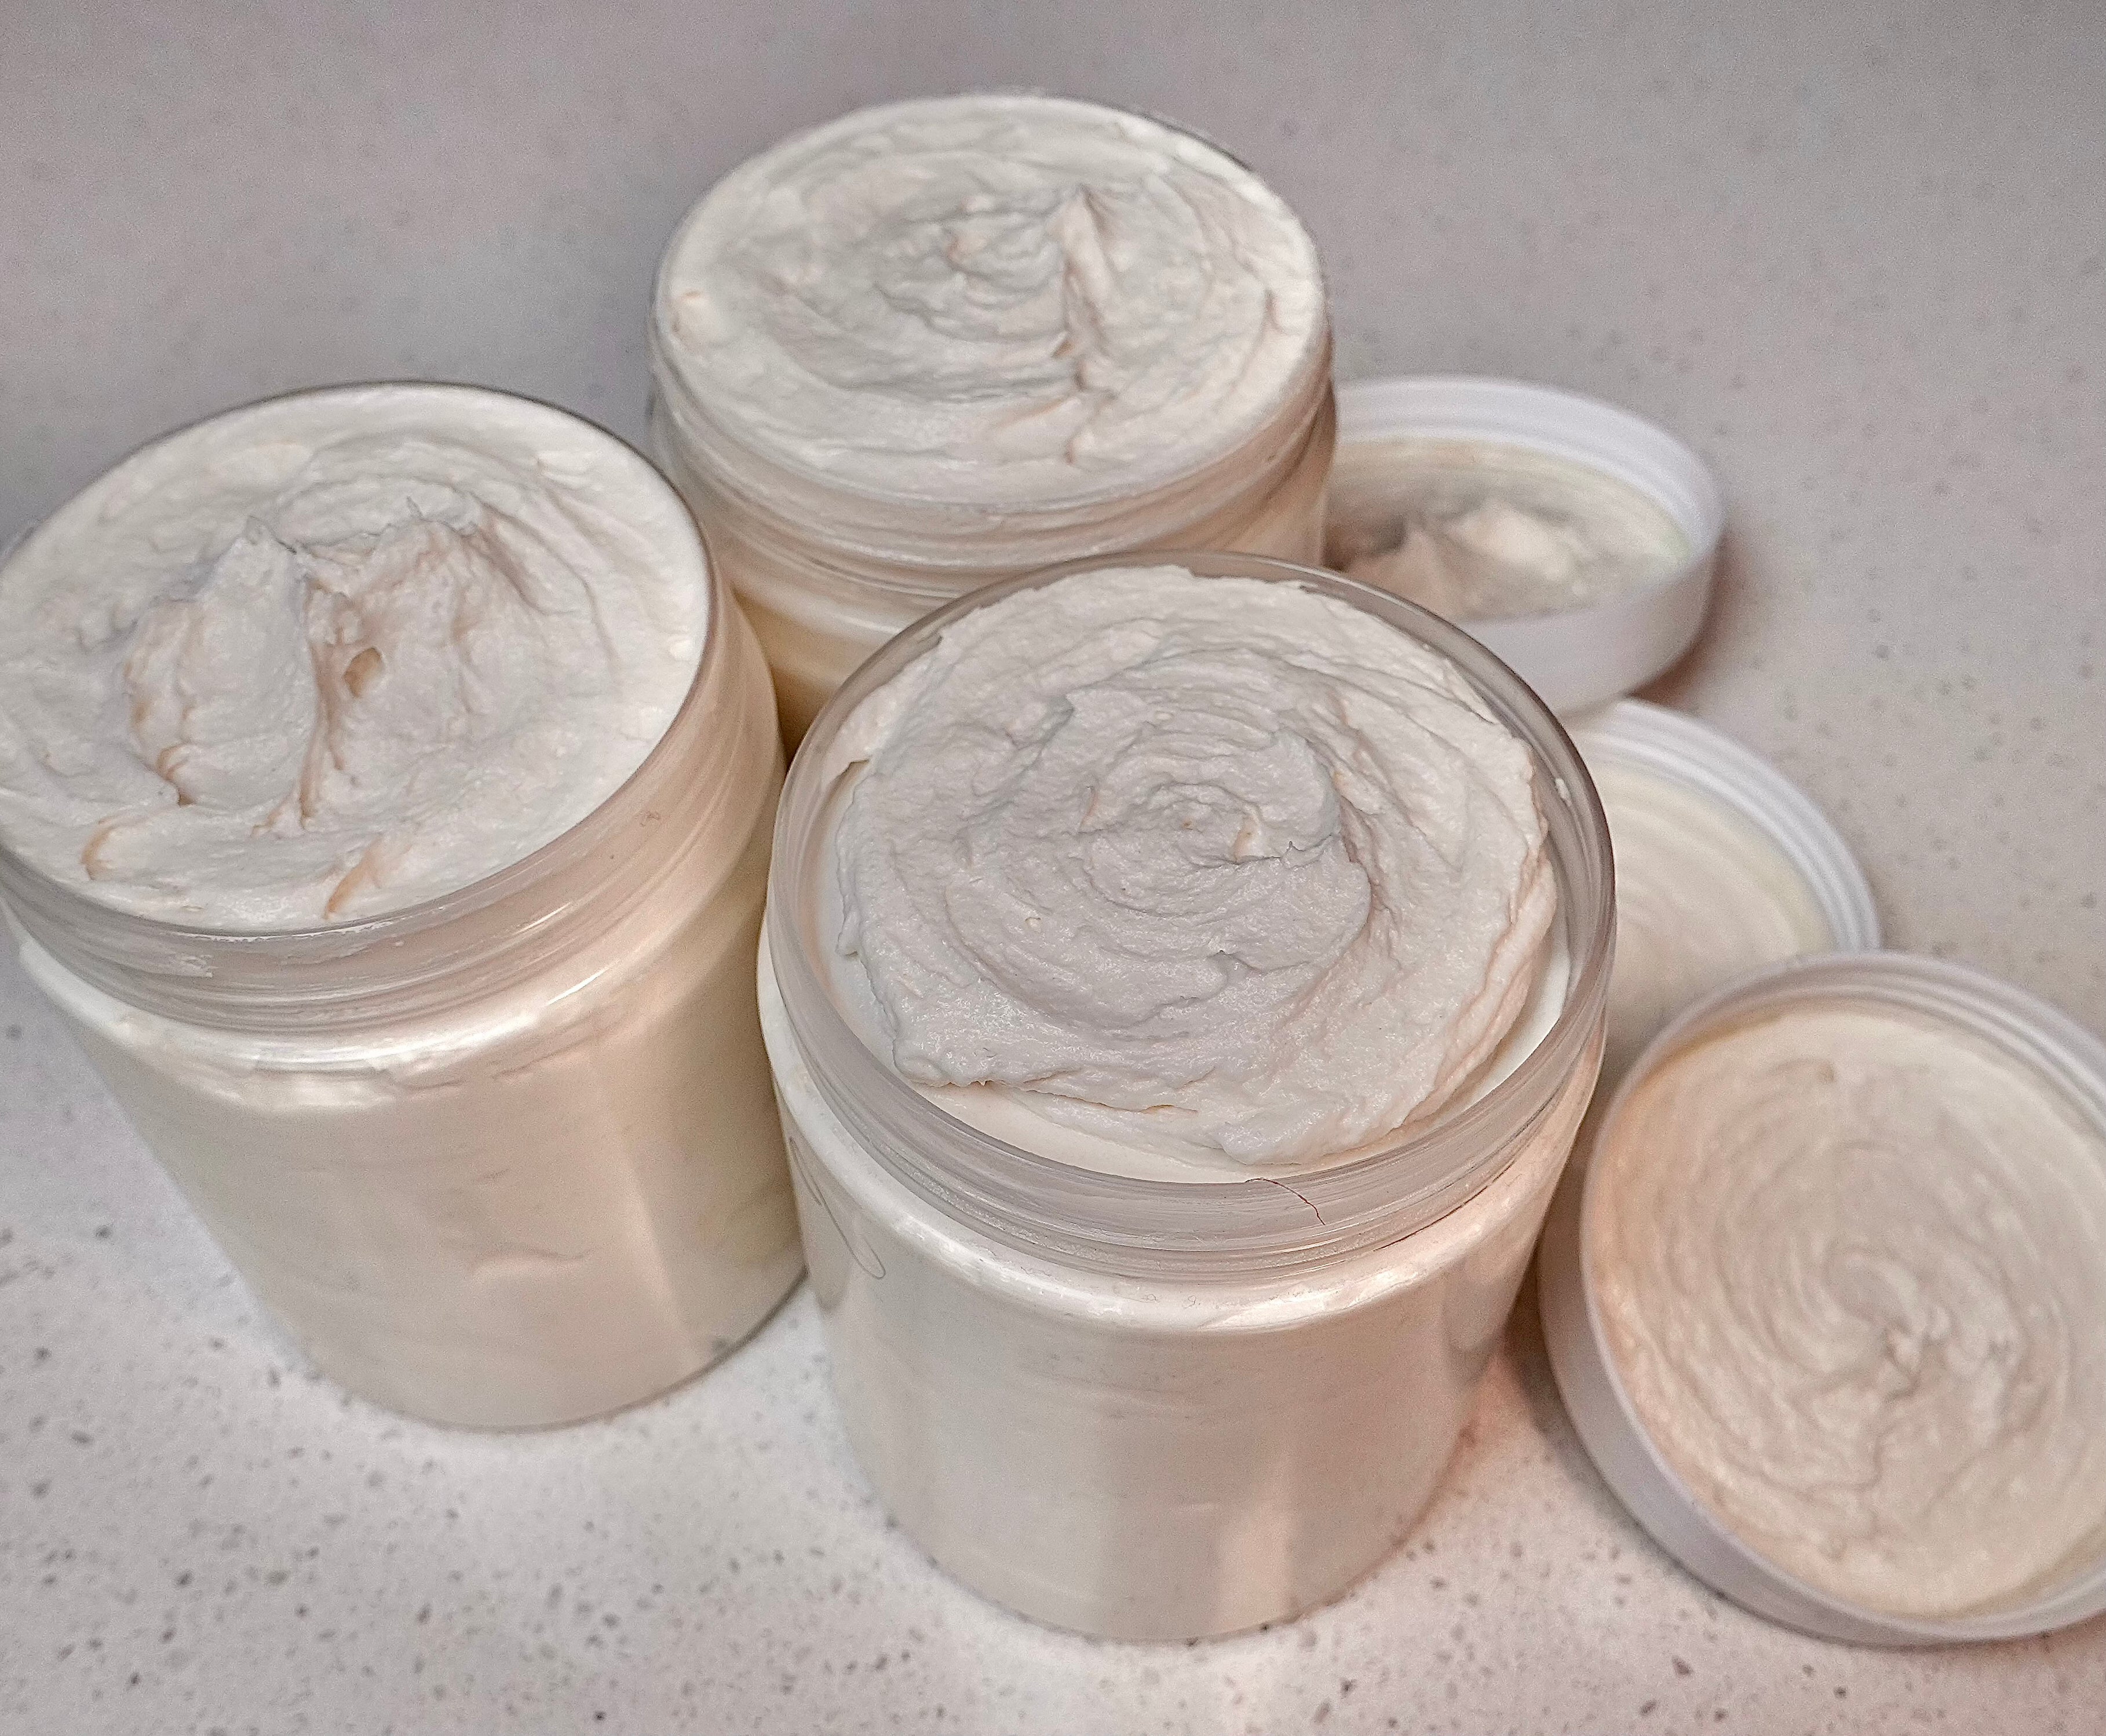 Three clear round jars filled with homemade white shea body butter, showcasing a luxurious skincare product for soft and radiant skin